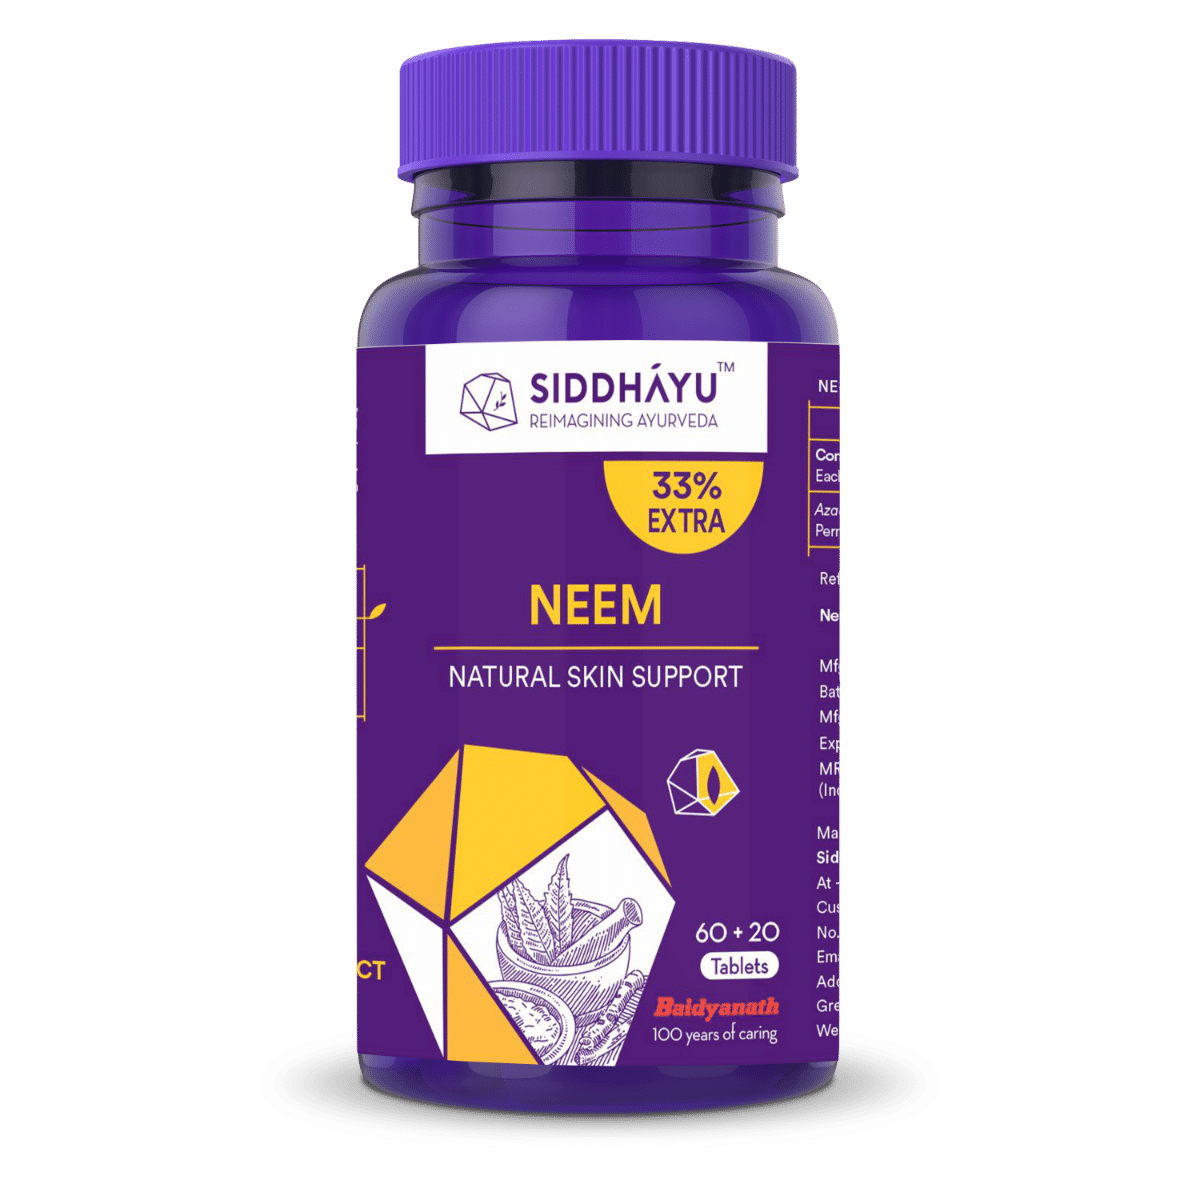 Buy Siddhayu Neem Natural Skin Support, 80 Tablets Online